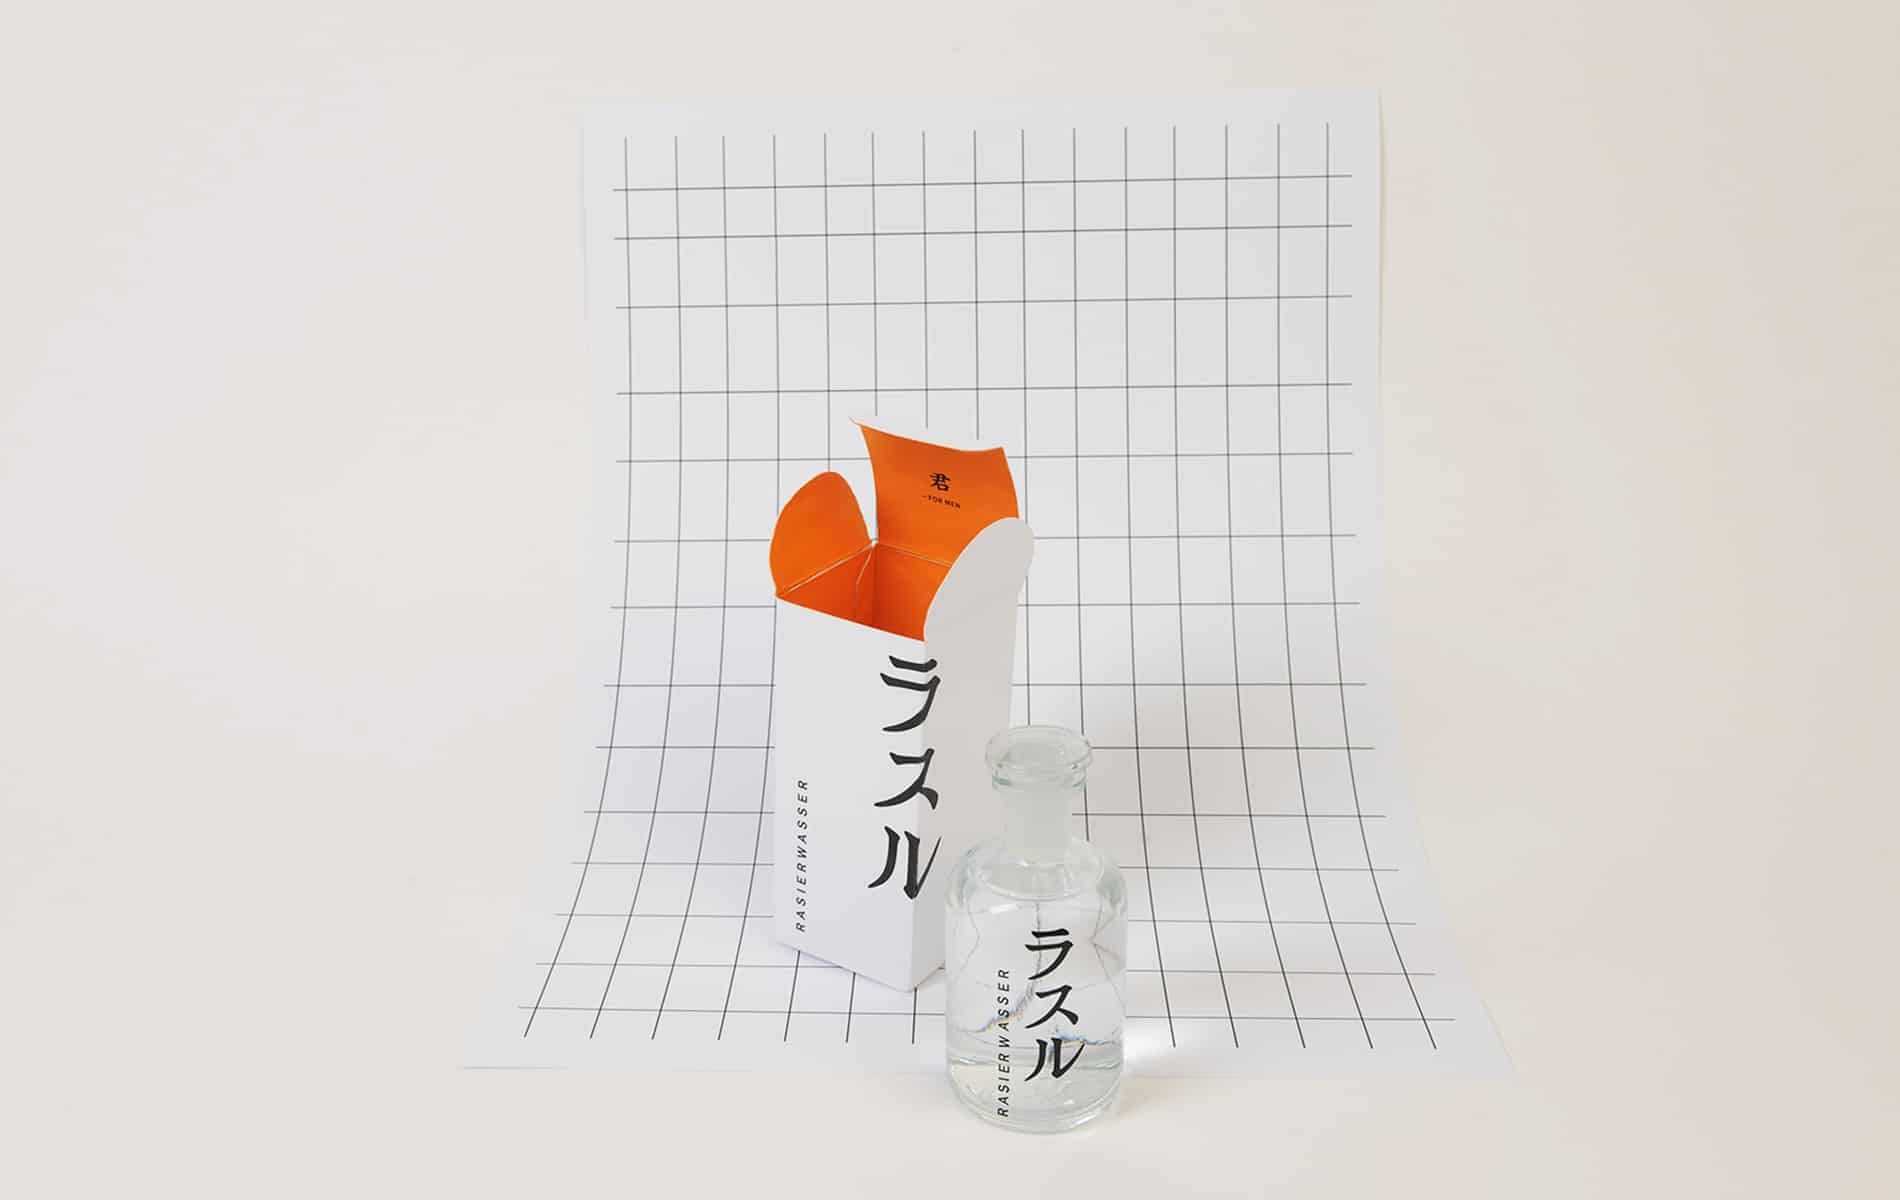 rasaru packaging using orange and white color combination